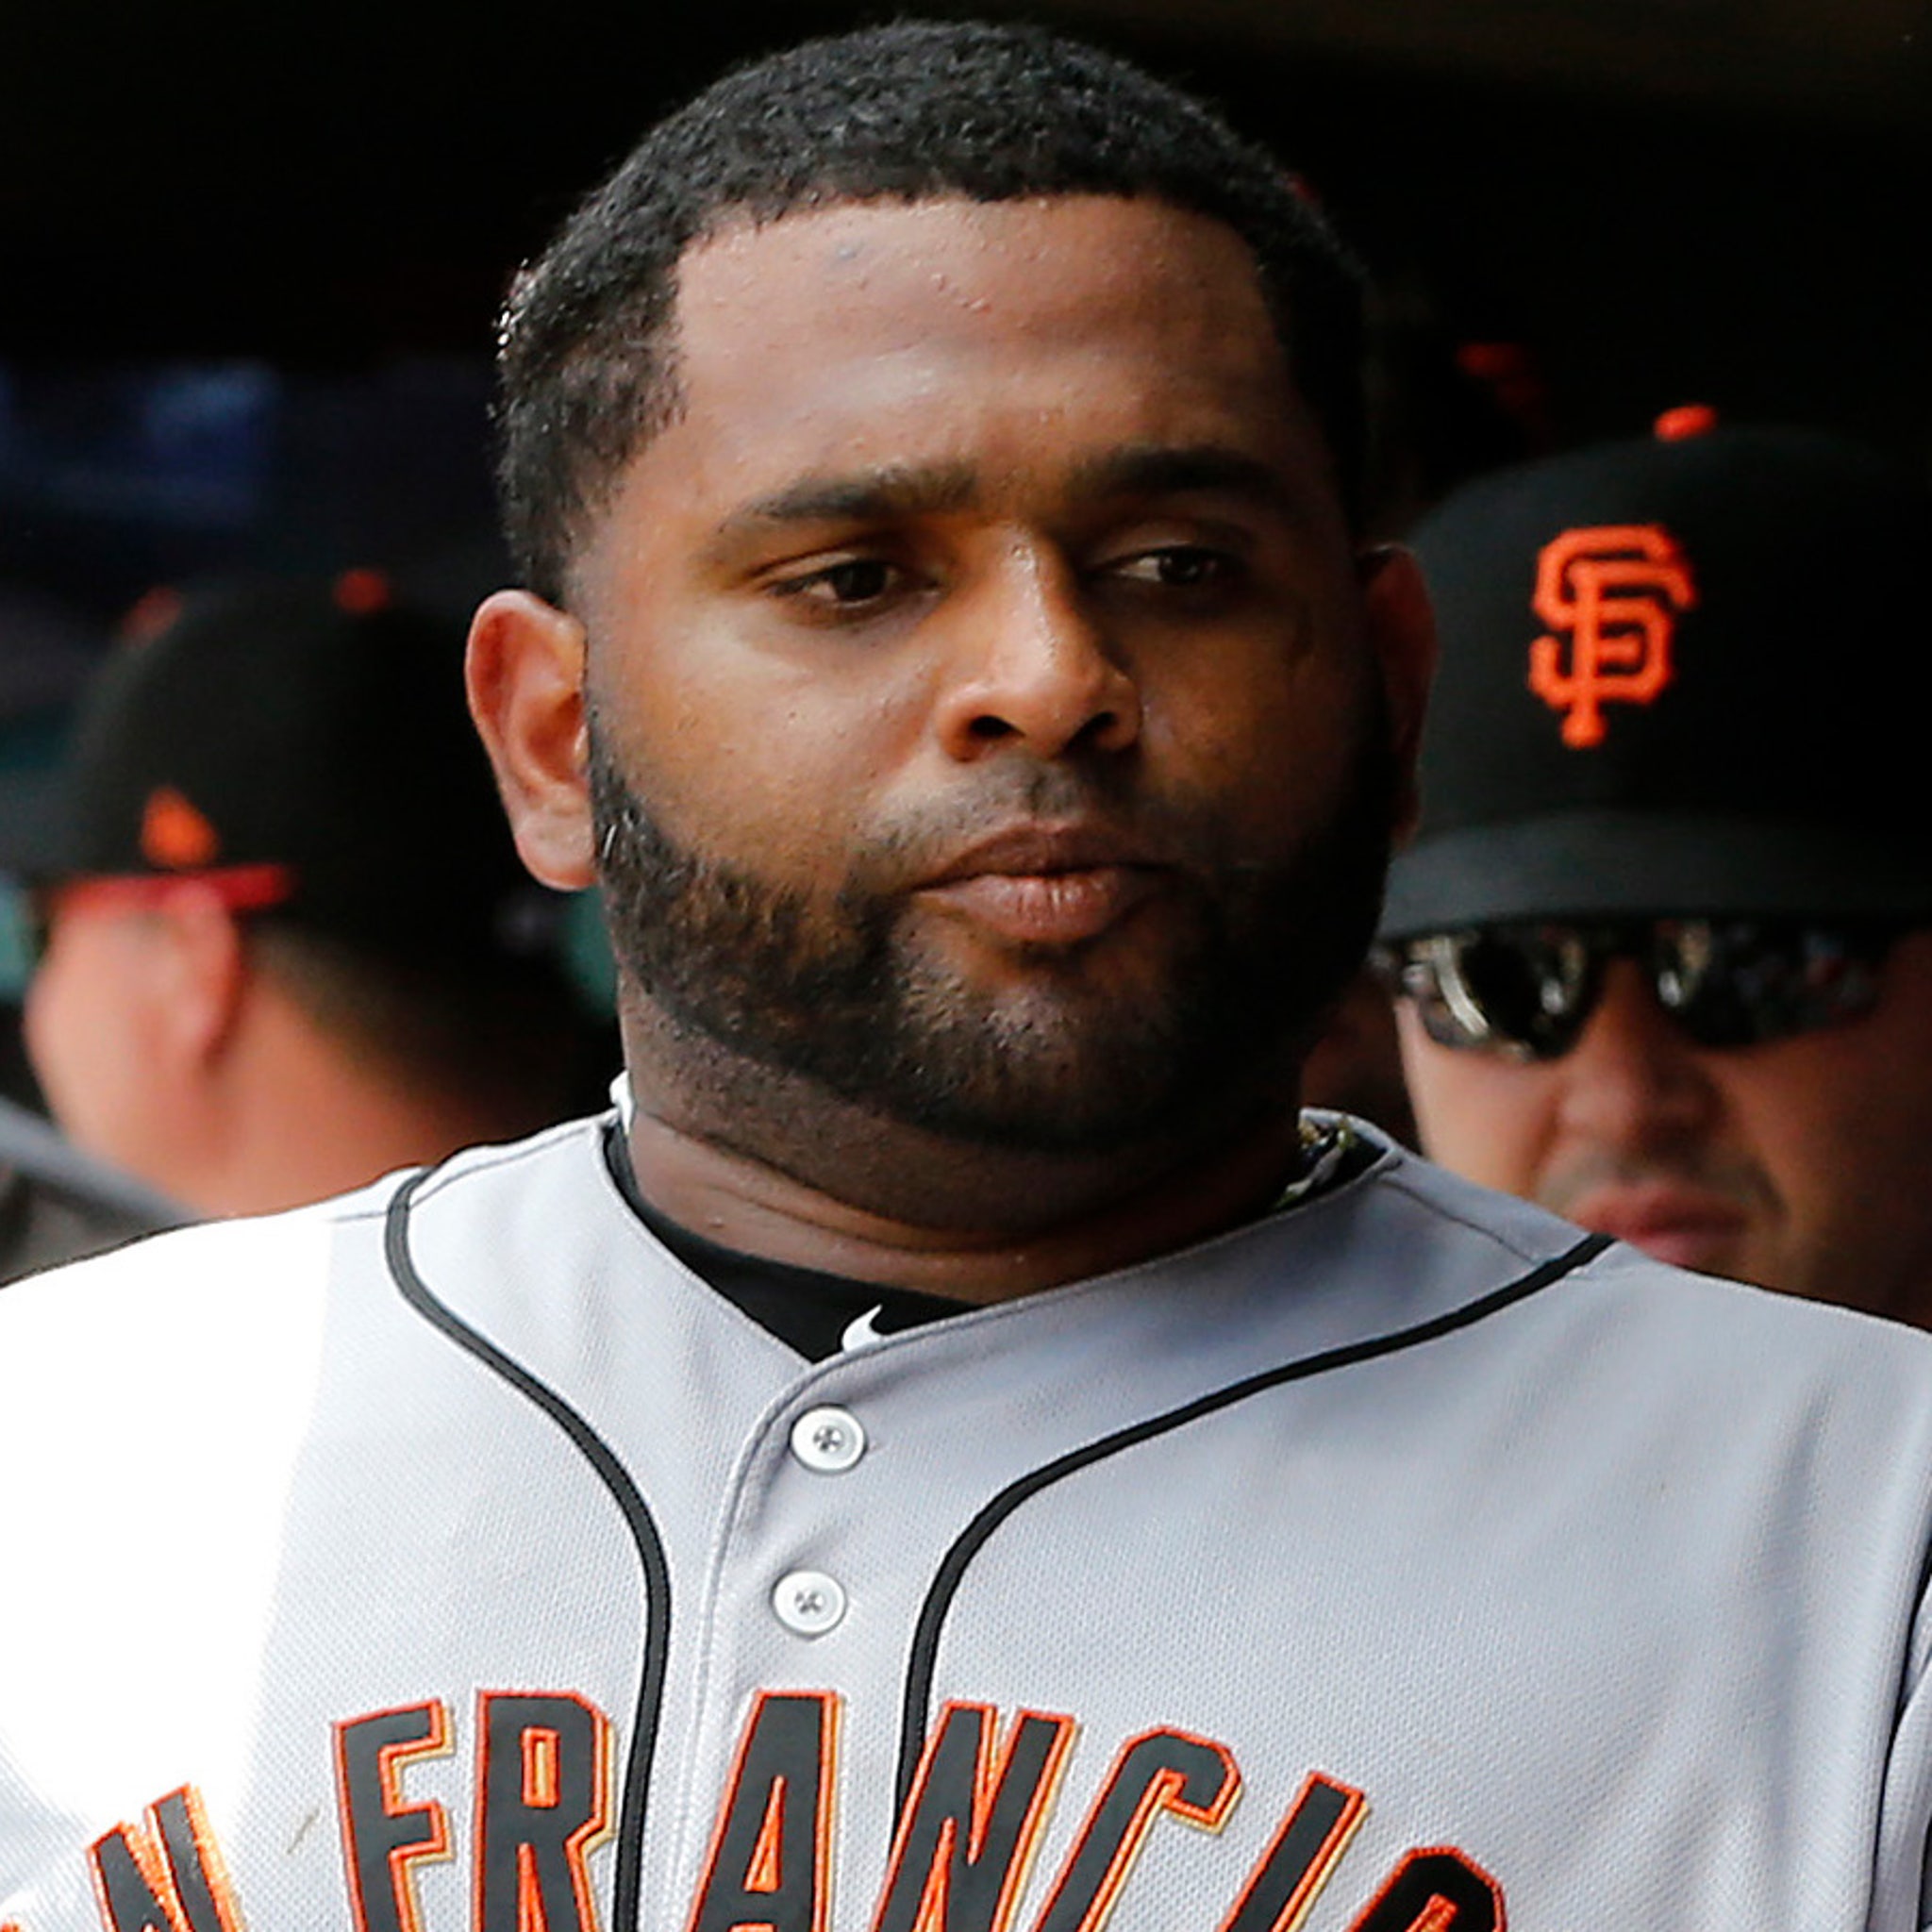 Here's photographic proof that Pablo Sandoval might be skinny